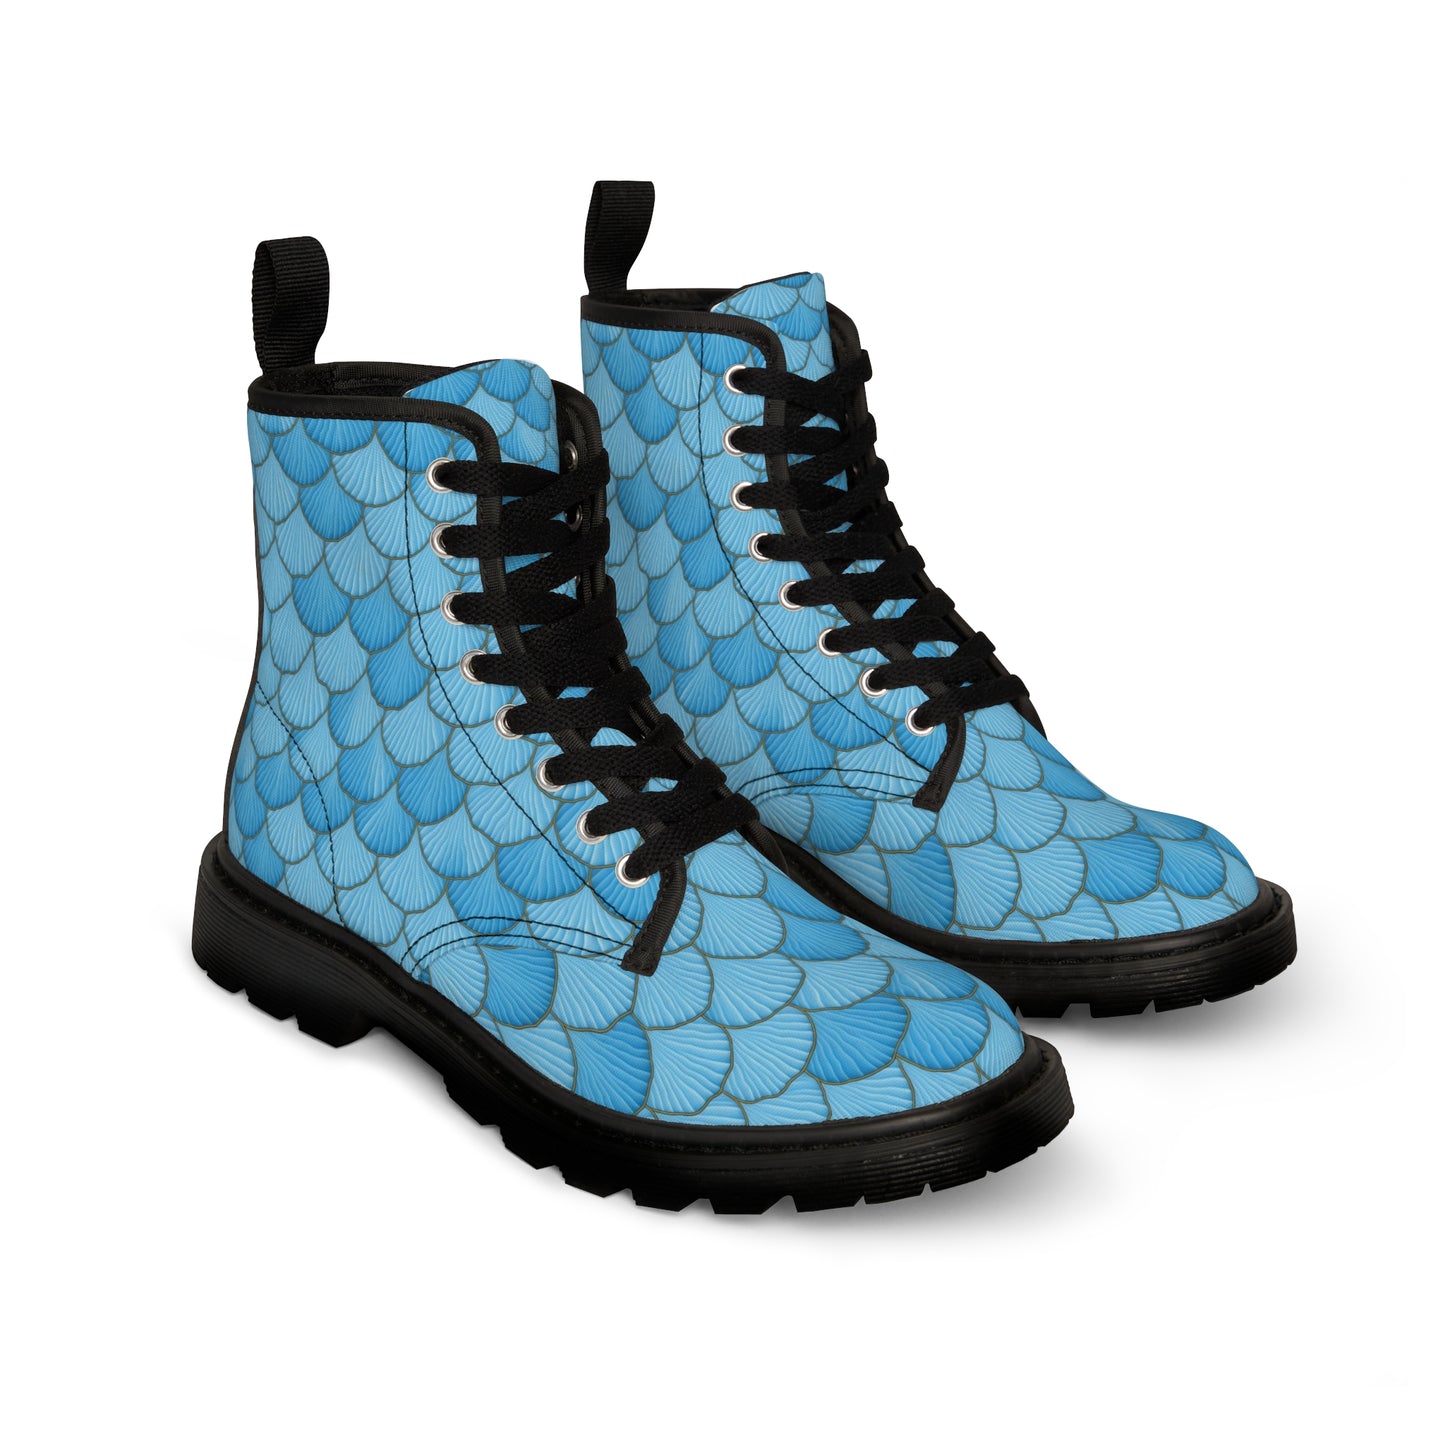 Make Waves with These Enchanting Seashell Mermaid-Print Canvas Boots for Women! Seashell Ocean Shoes/Boots